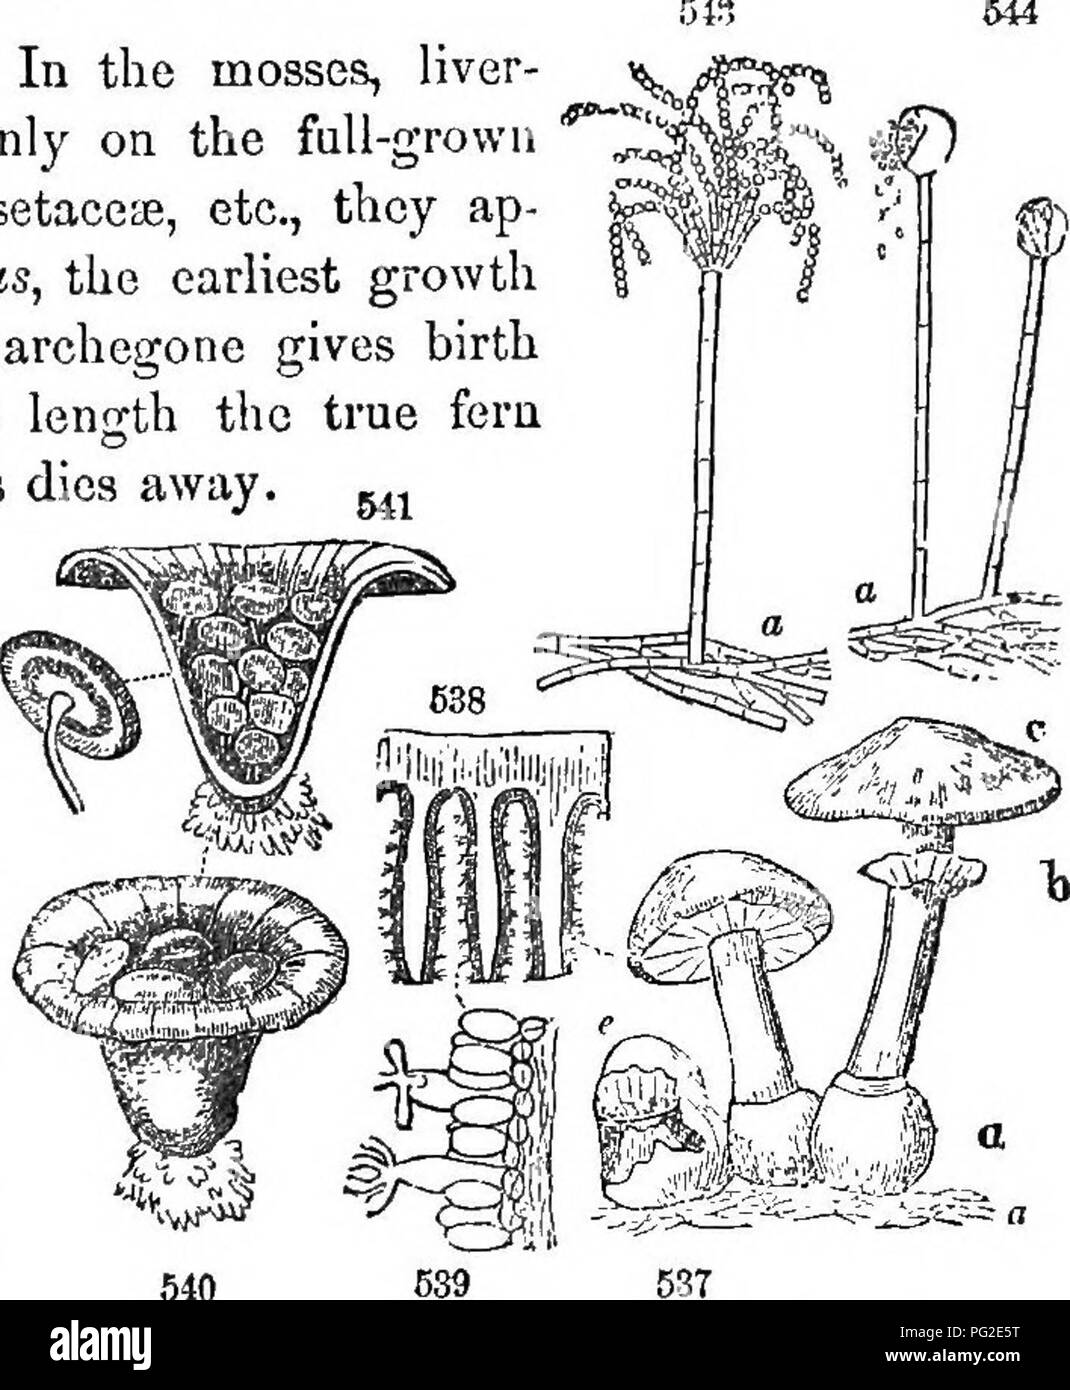 . Class-book of botany : being outlines of the structure, physiology, and classification of plants ; with a flora of the United States and Canada . Botany; Botany; Botany. Bepatica!. SM, Marchantia, sterilo plant. 524â5, Fortilo plant. 520, Vertical section of the fertil-receptacle ; 527, of a perianth, showing the sporango bursting, 523, One of the clatora with four spores. 529, Portion of it highly magnlfled. of the flowering plants. In the mosses, liver- worts, etc., they appear only on the full-grown plant; in the ferns, Equisetacese, etc., they ap- pear only on the prothallus, the earlies Stock Photo